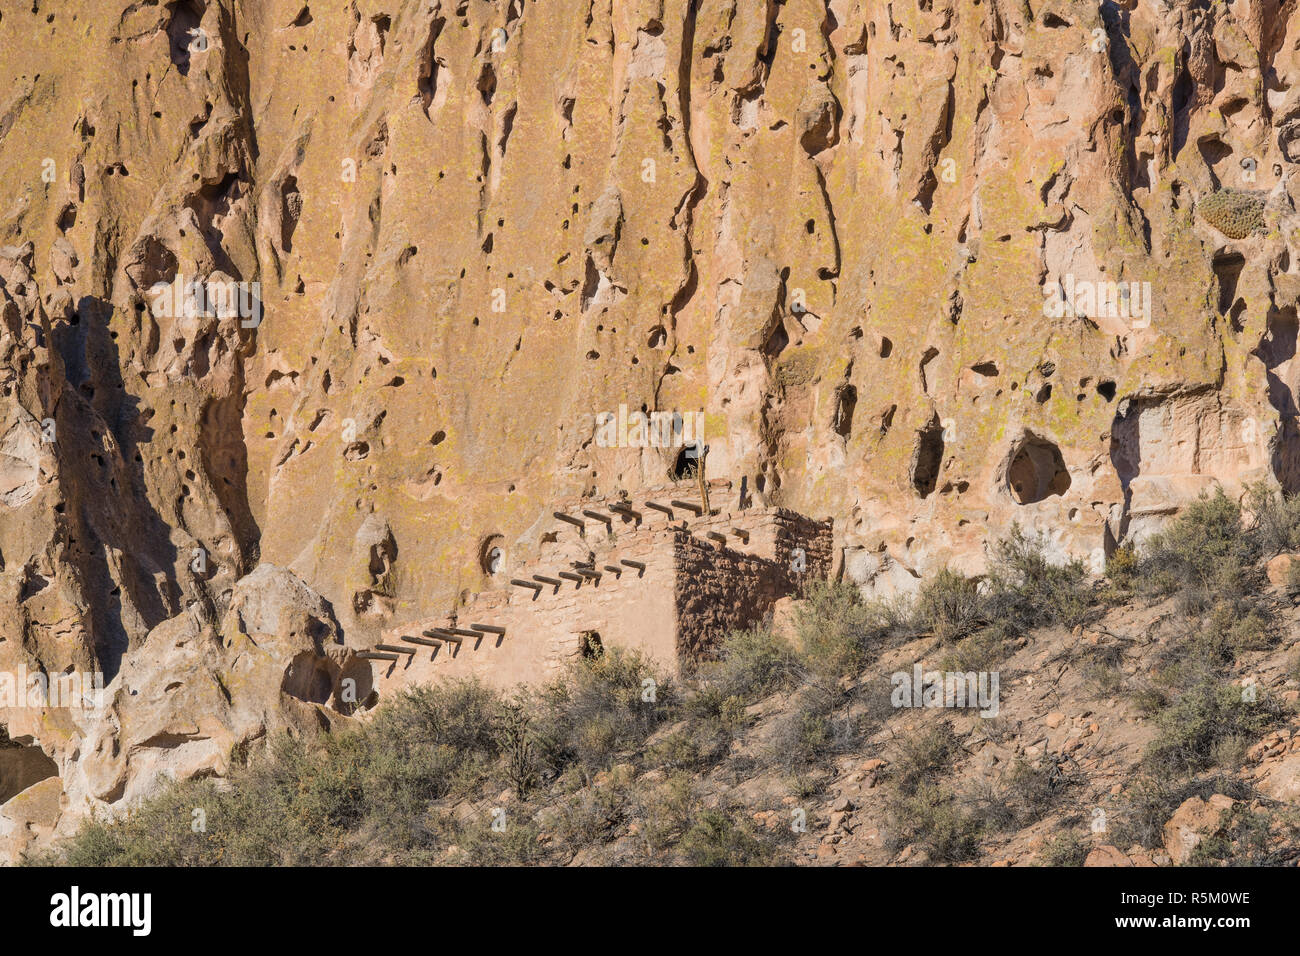 Ancient adobe ruins along the base of a colorful cliff at Bandelier National Monument, New Mexico Stock Photo